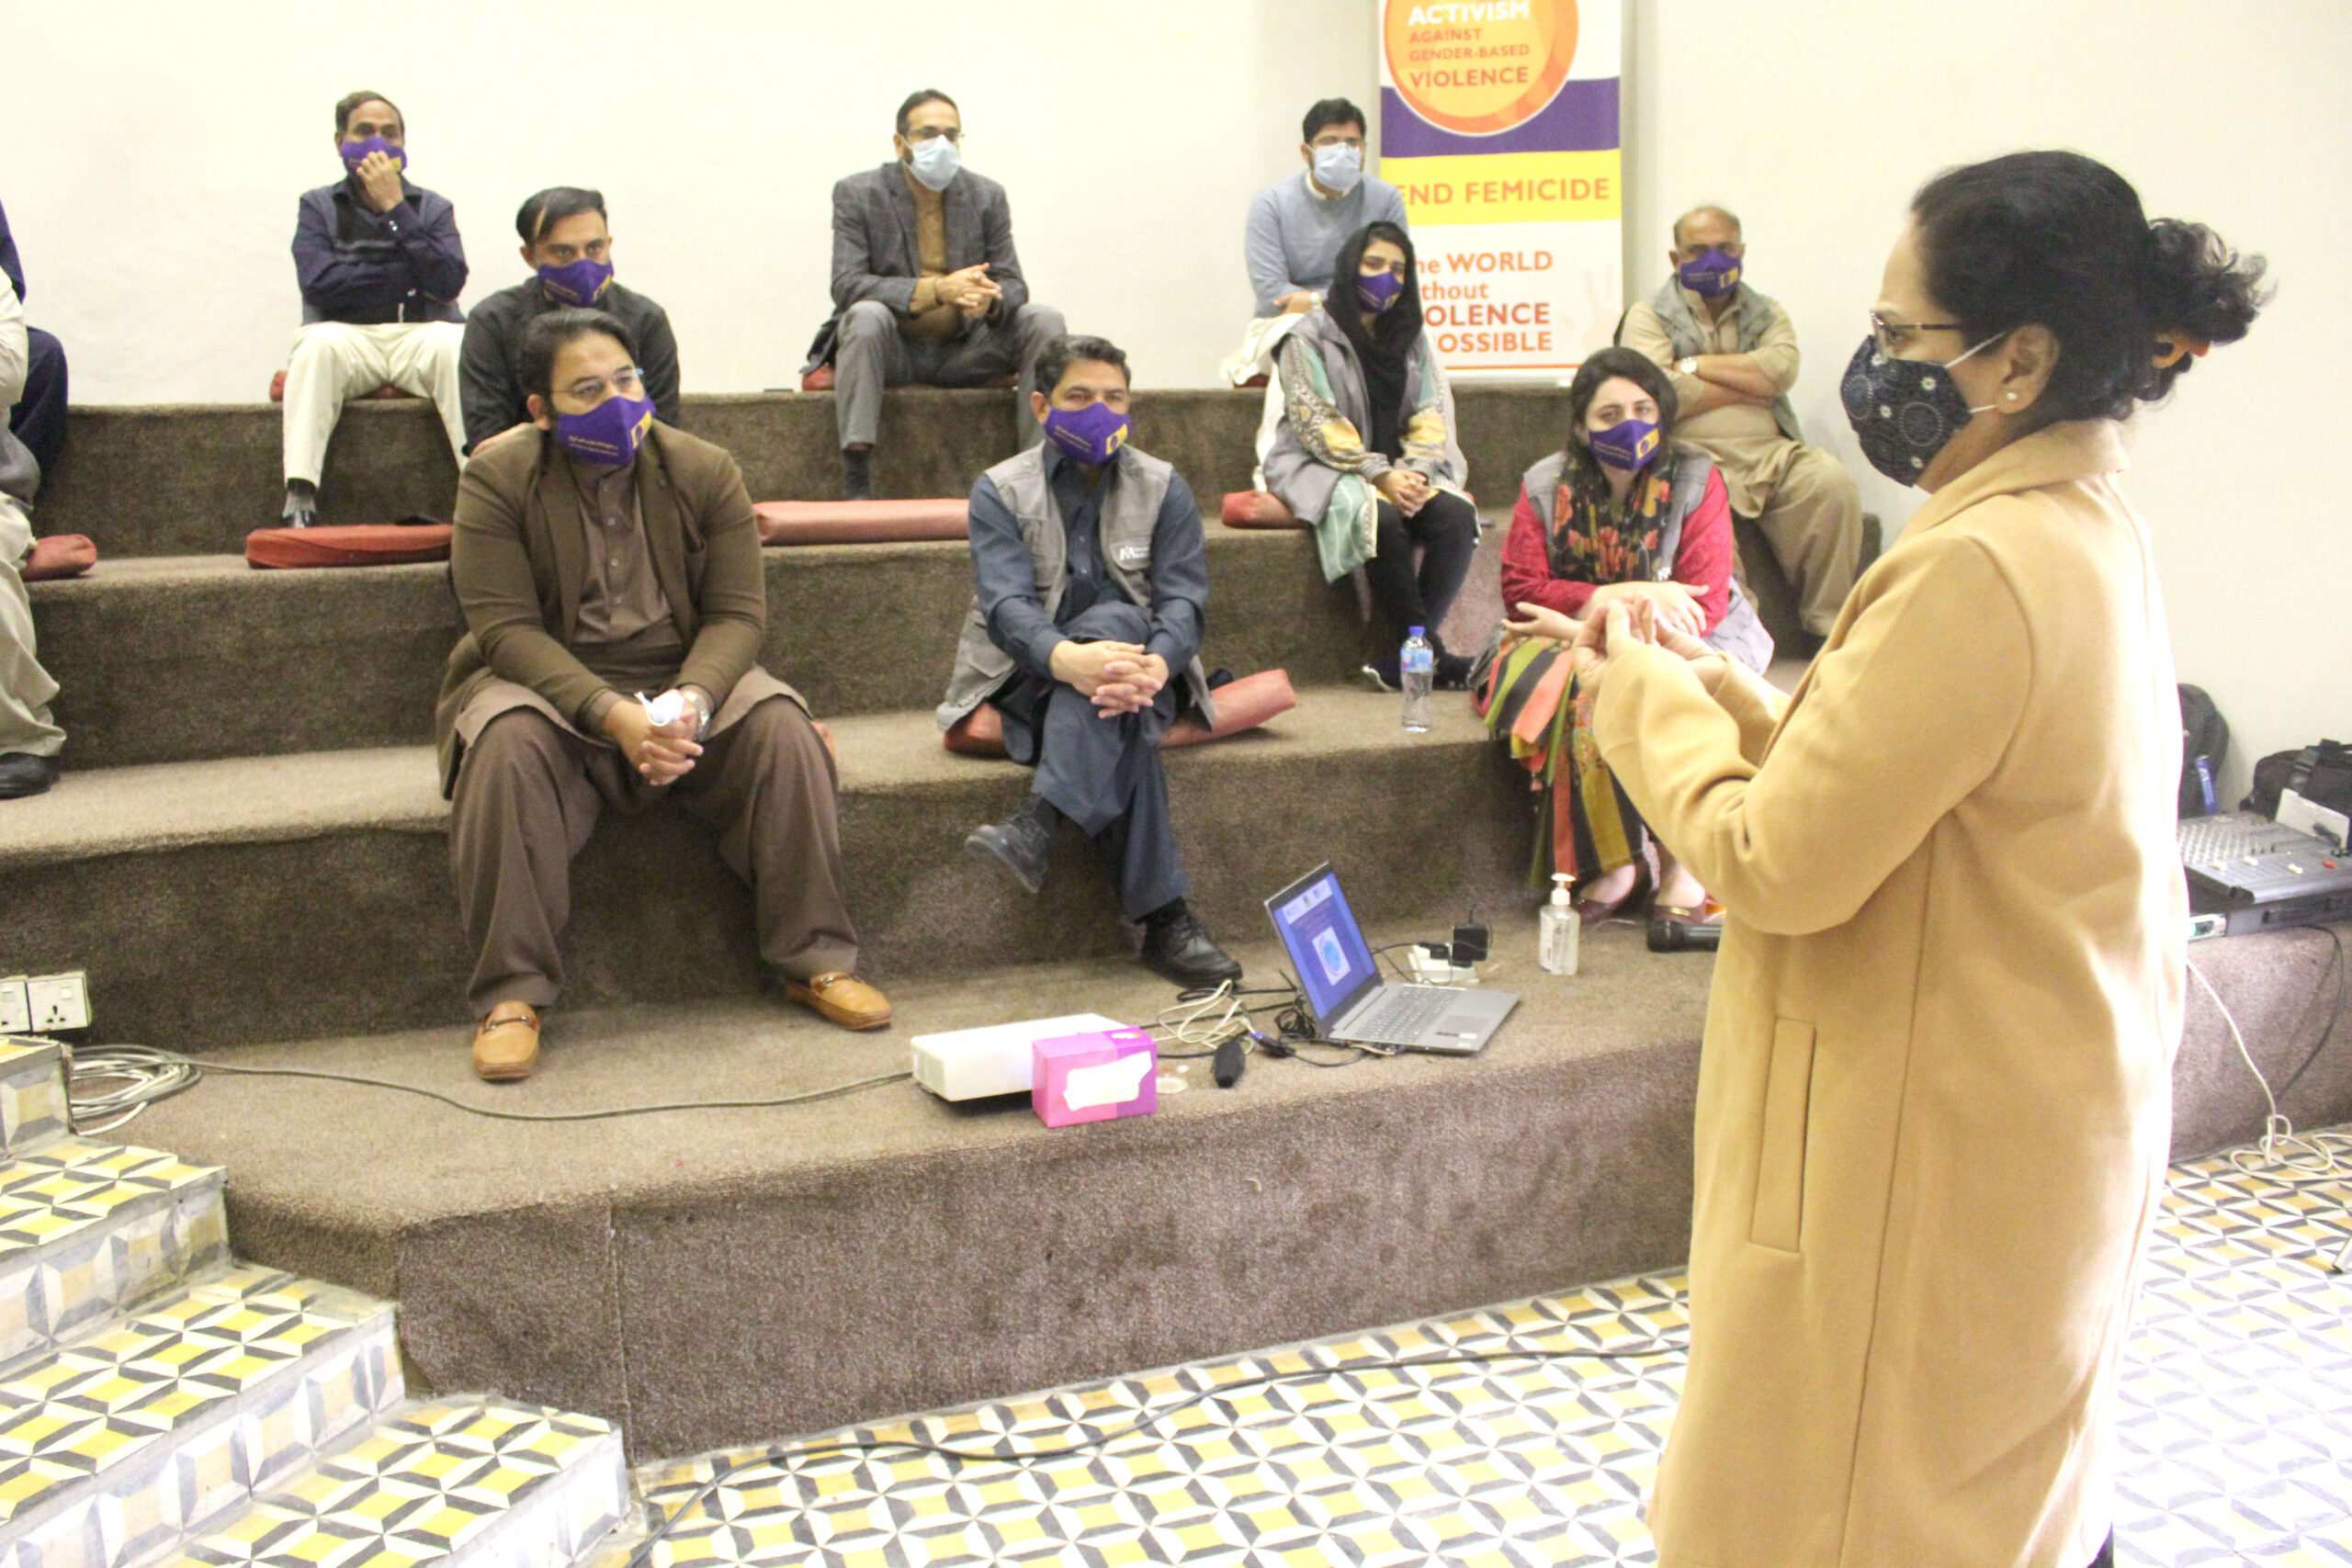 Our team in Pakistan discussing the importance of the 16 Days campaign.